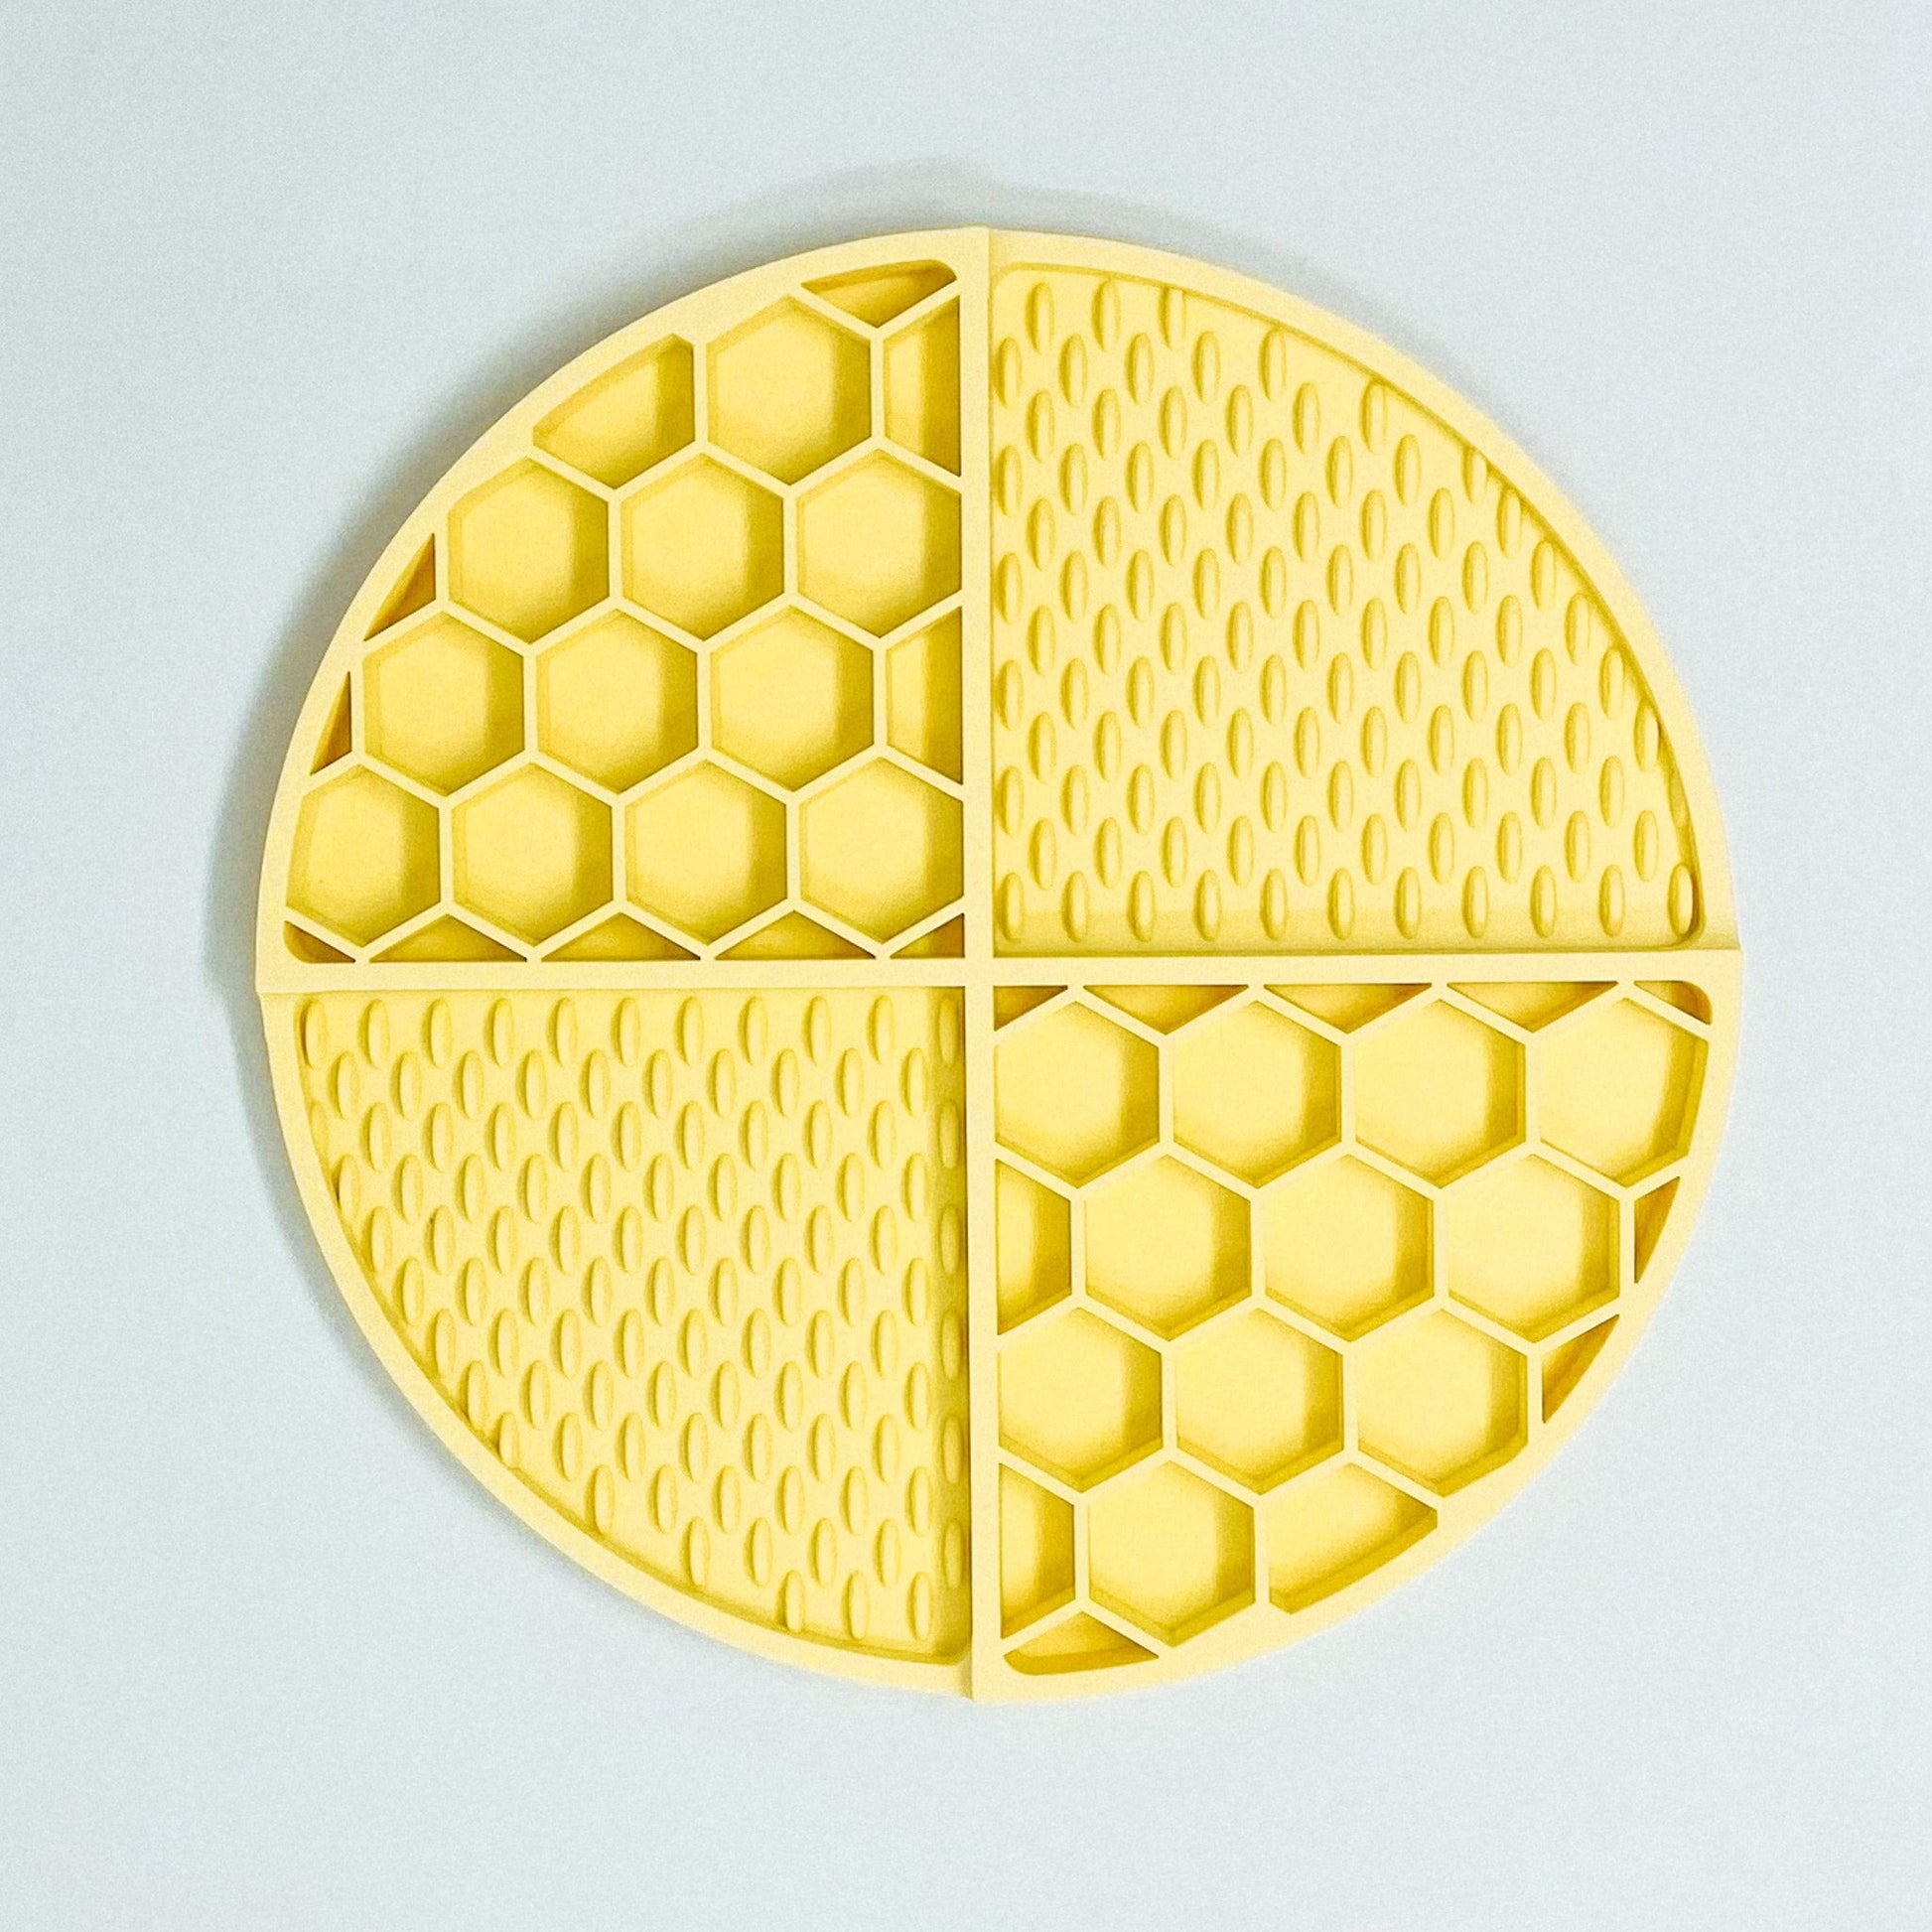 Light yellow silicone lick mat, separated into 4 sections. 2 sections are honeycomb shaped and 2 sections are licky texture.